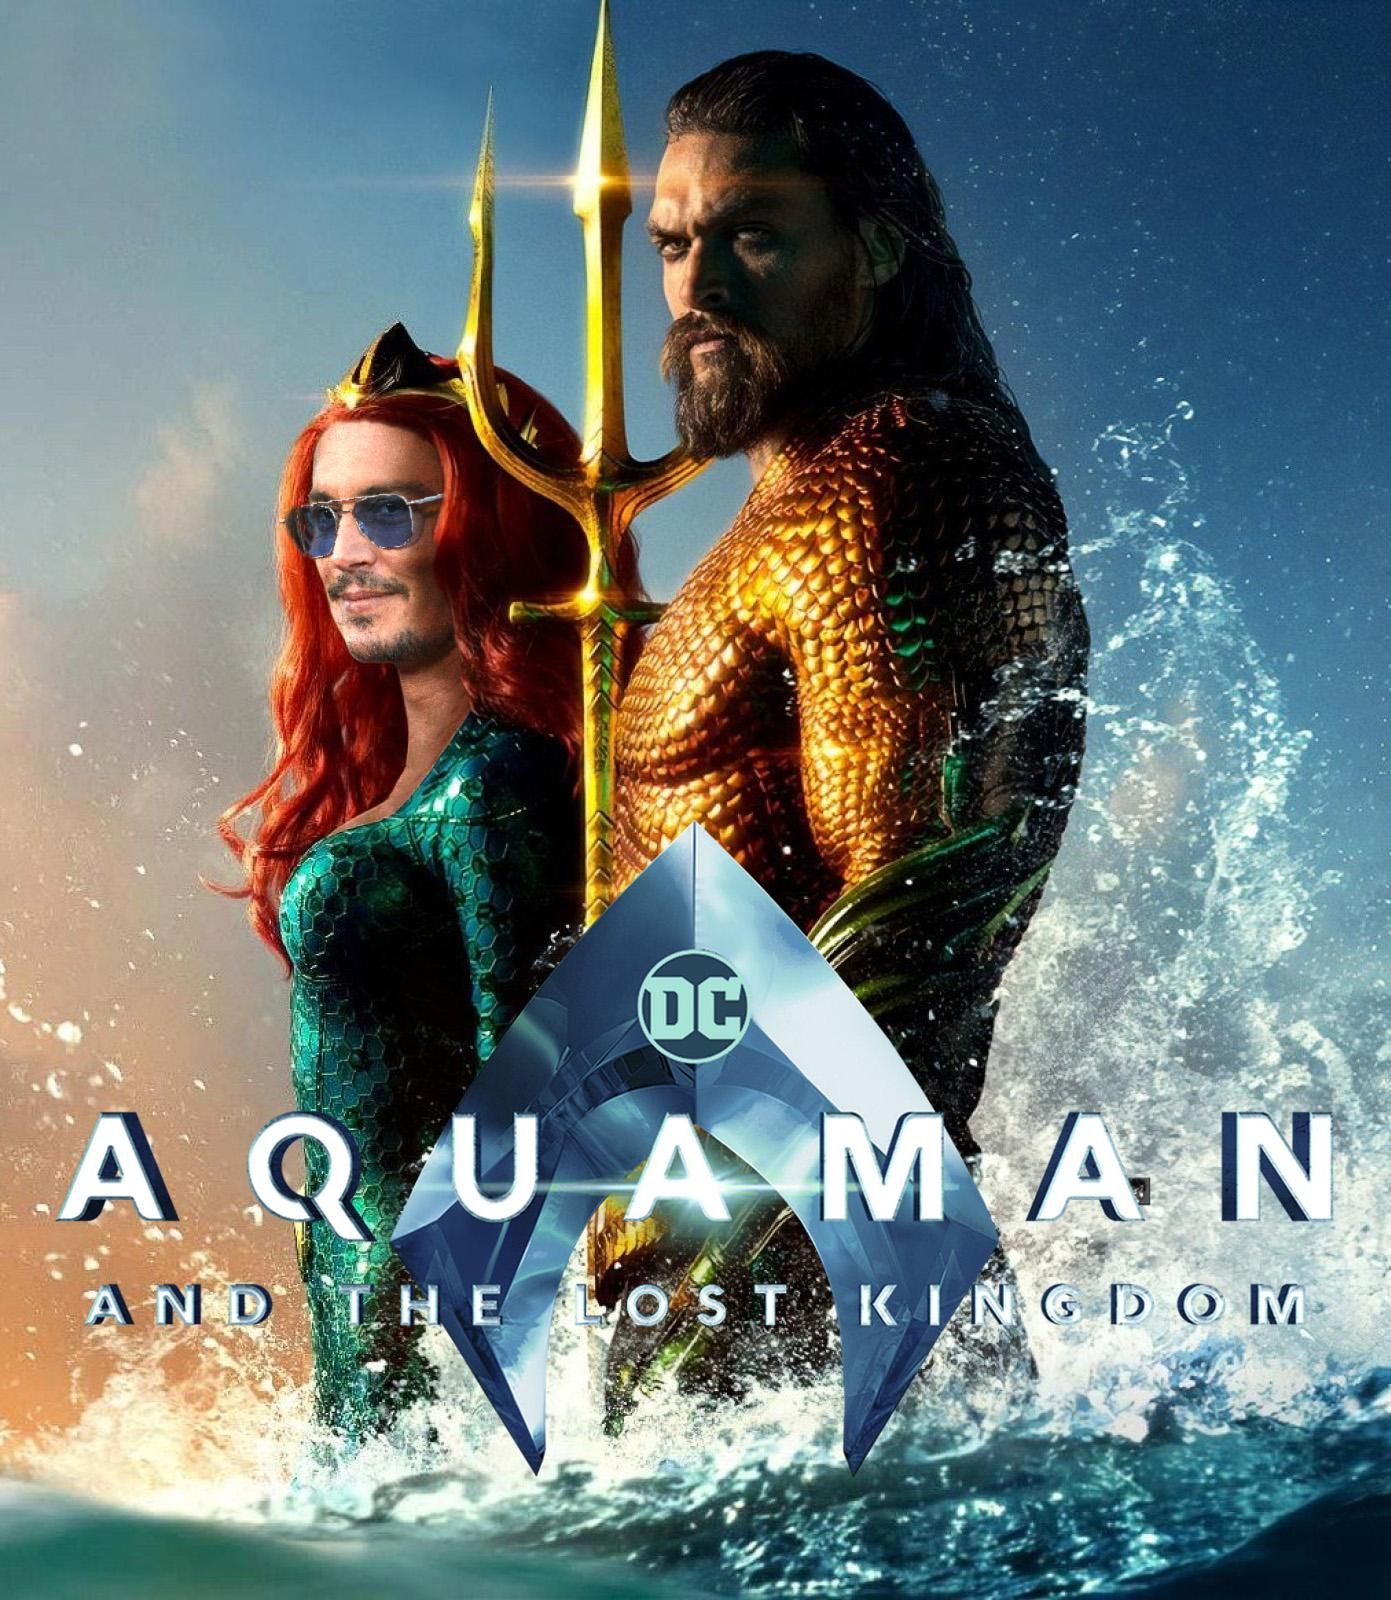 Petition to remove Amber Heard from Aquaman passes 4 Million. How fudgin' hilarious would it be if Johnny Depp replaced her...